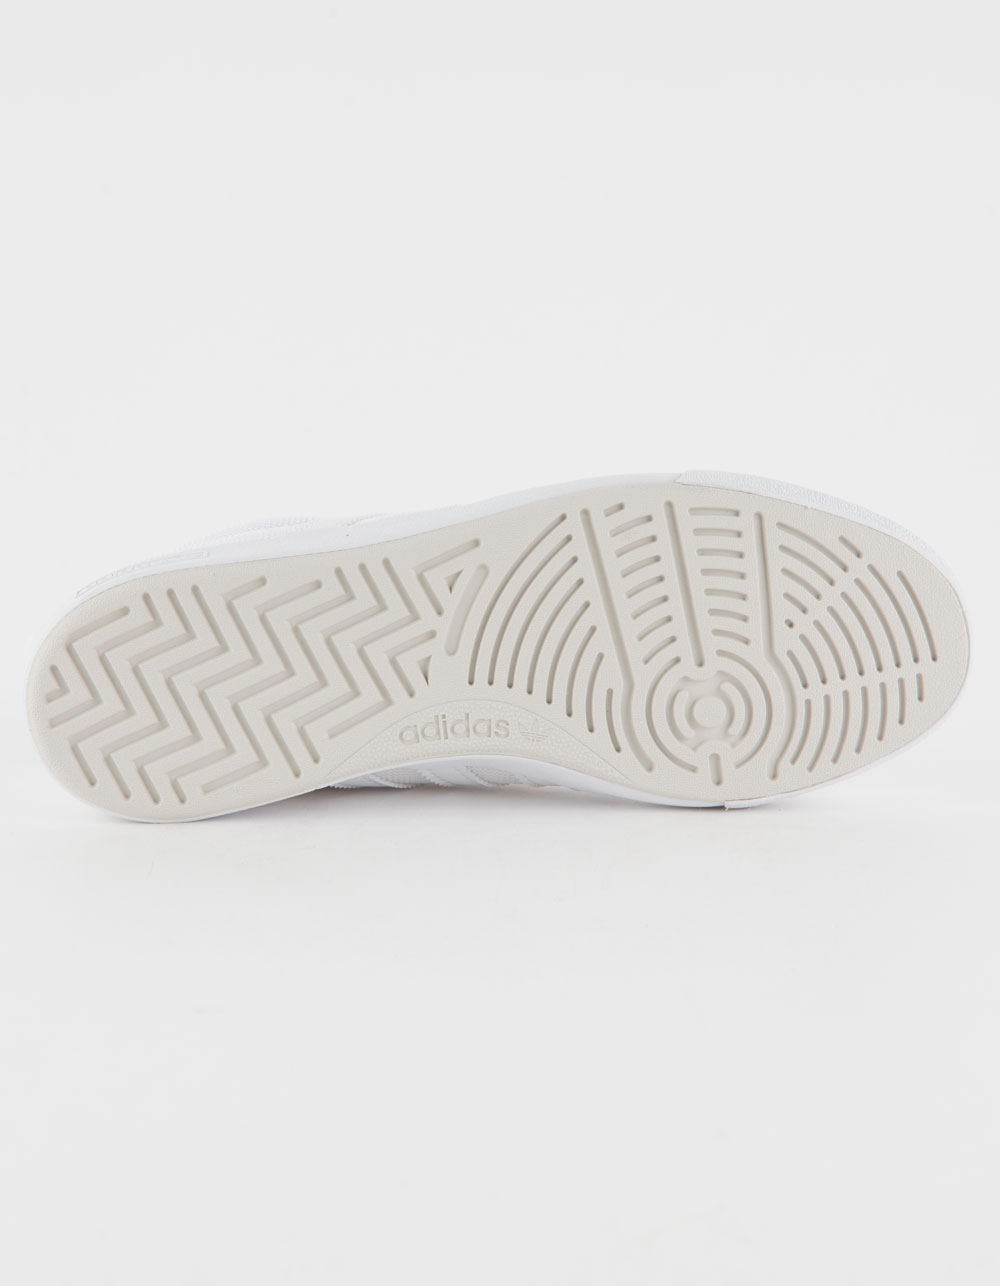 ADIDAS Nora Mens Shoes - WHITE | Tillys